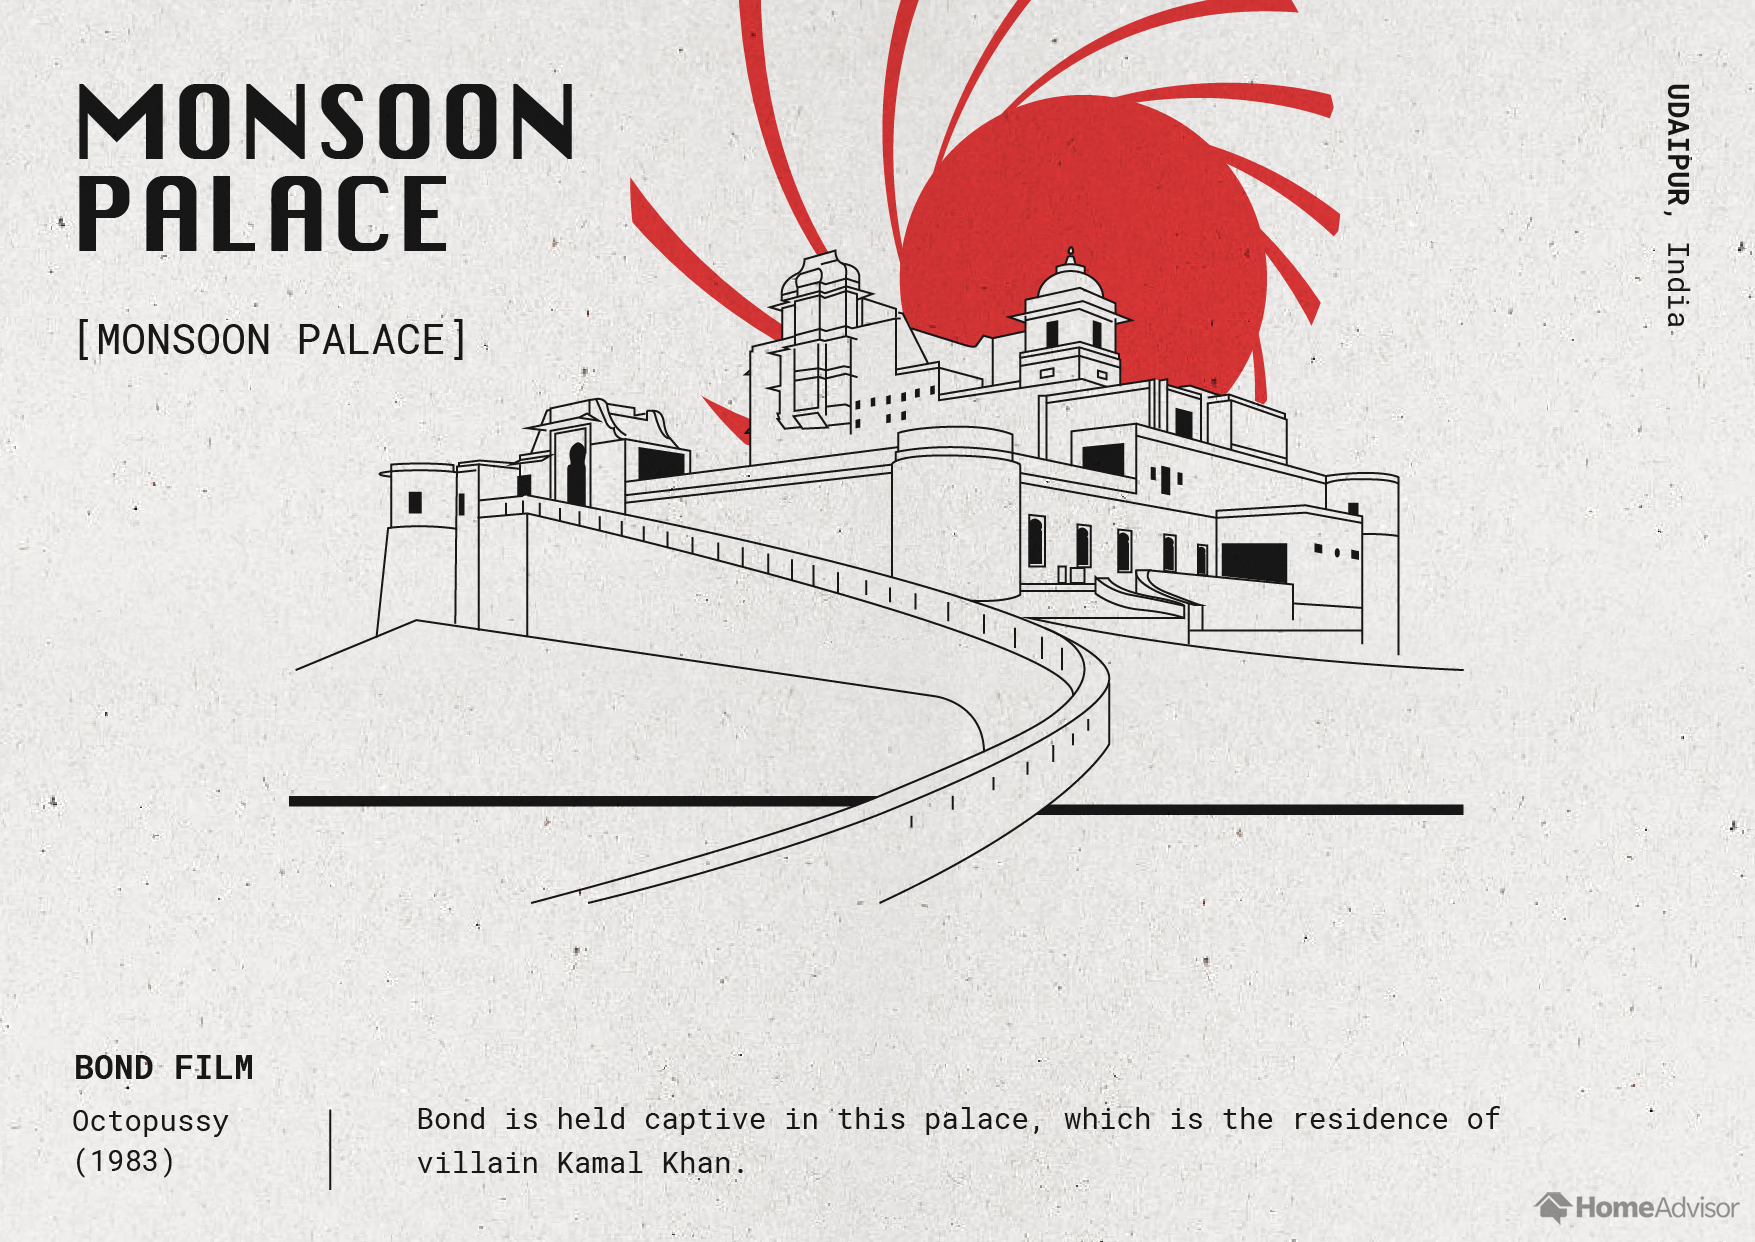 18_The-Architecture-of-James-Bond_Monsoon-Palace.png